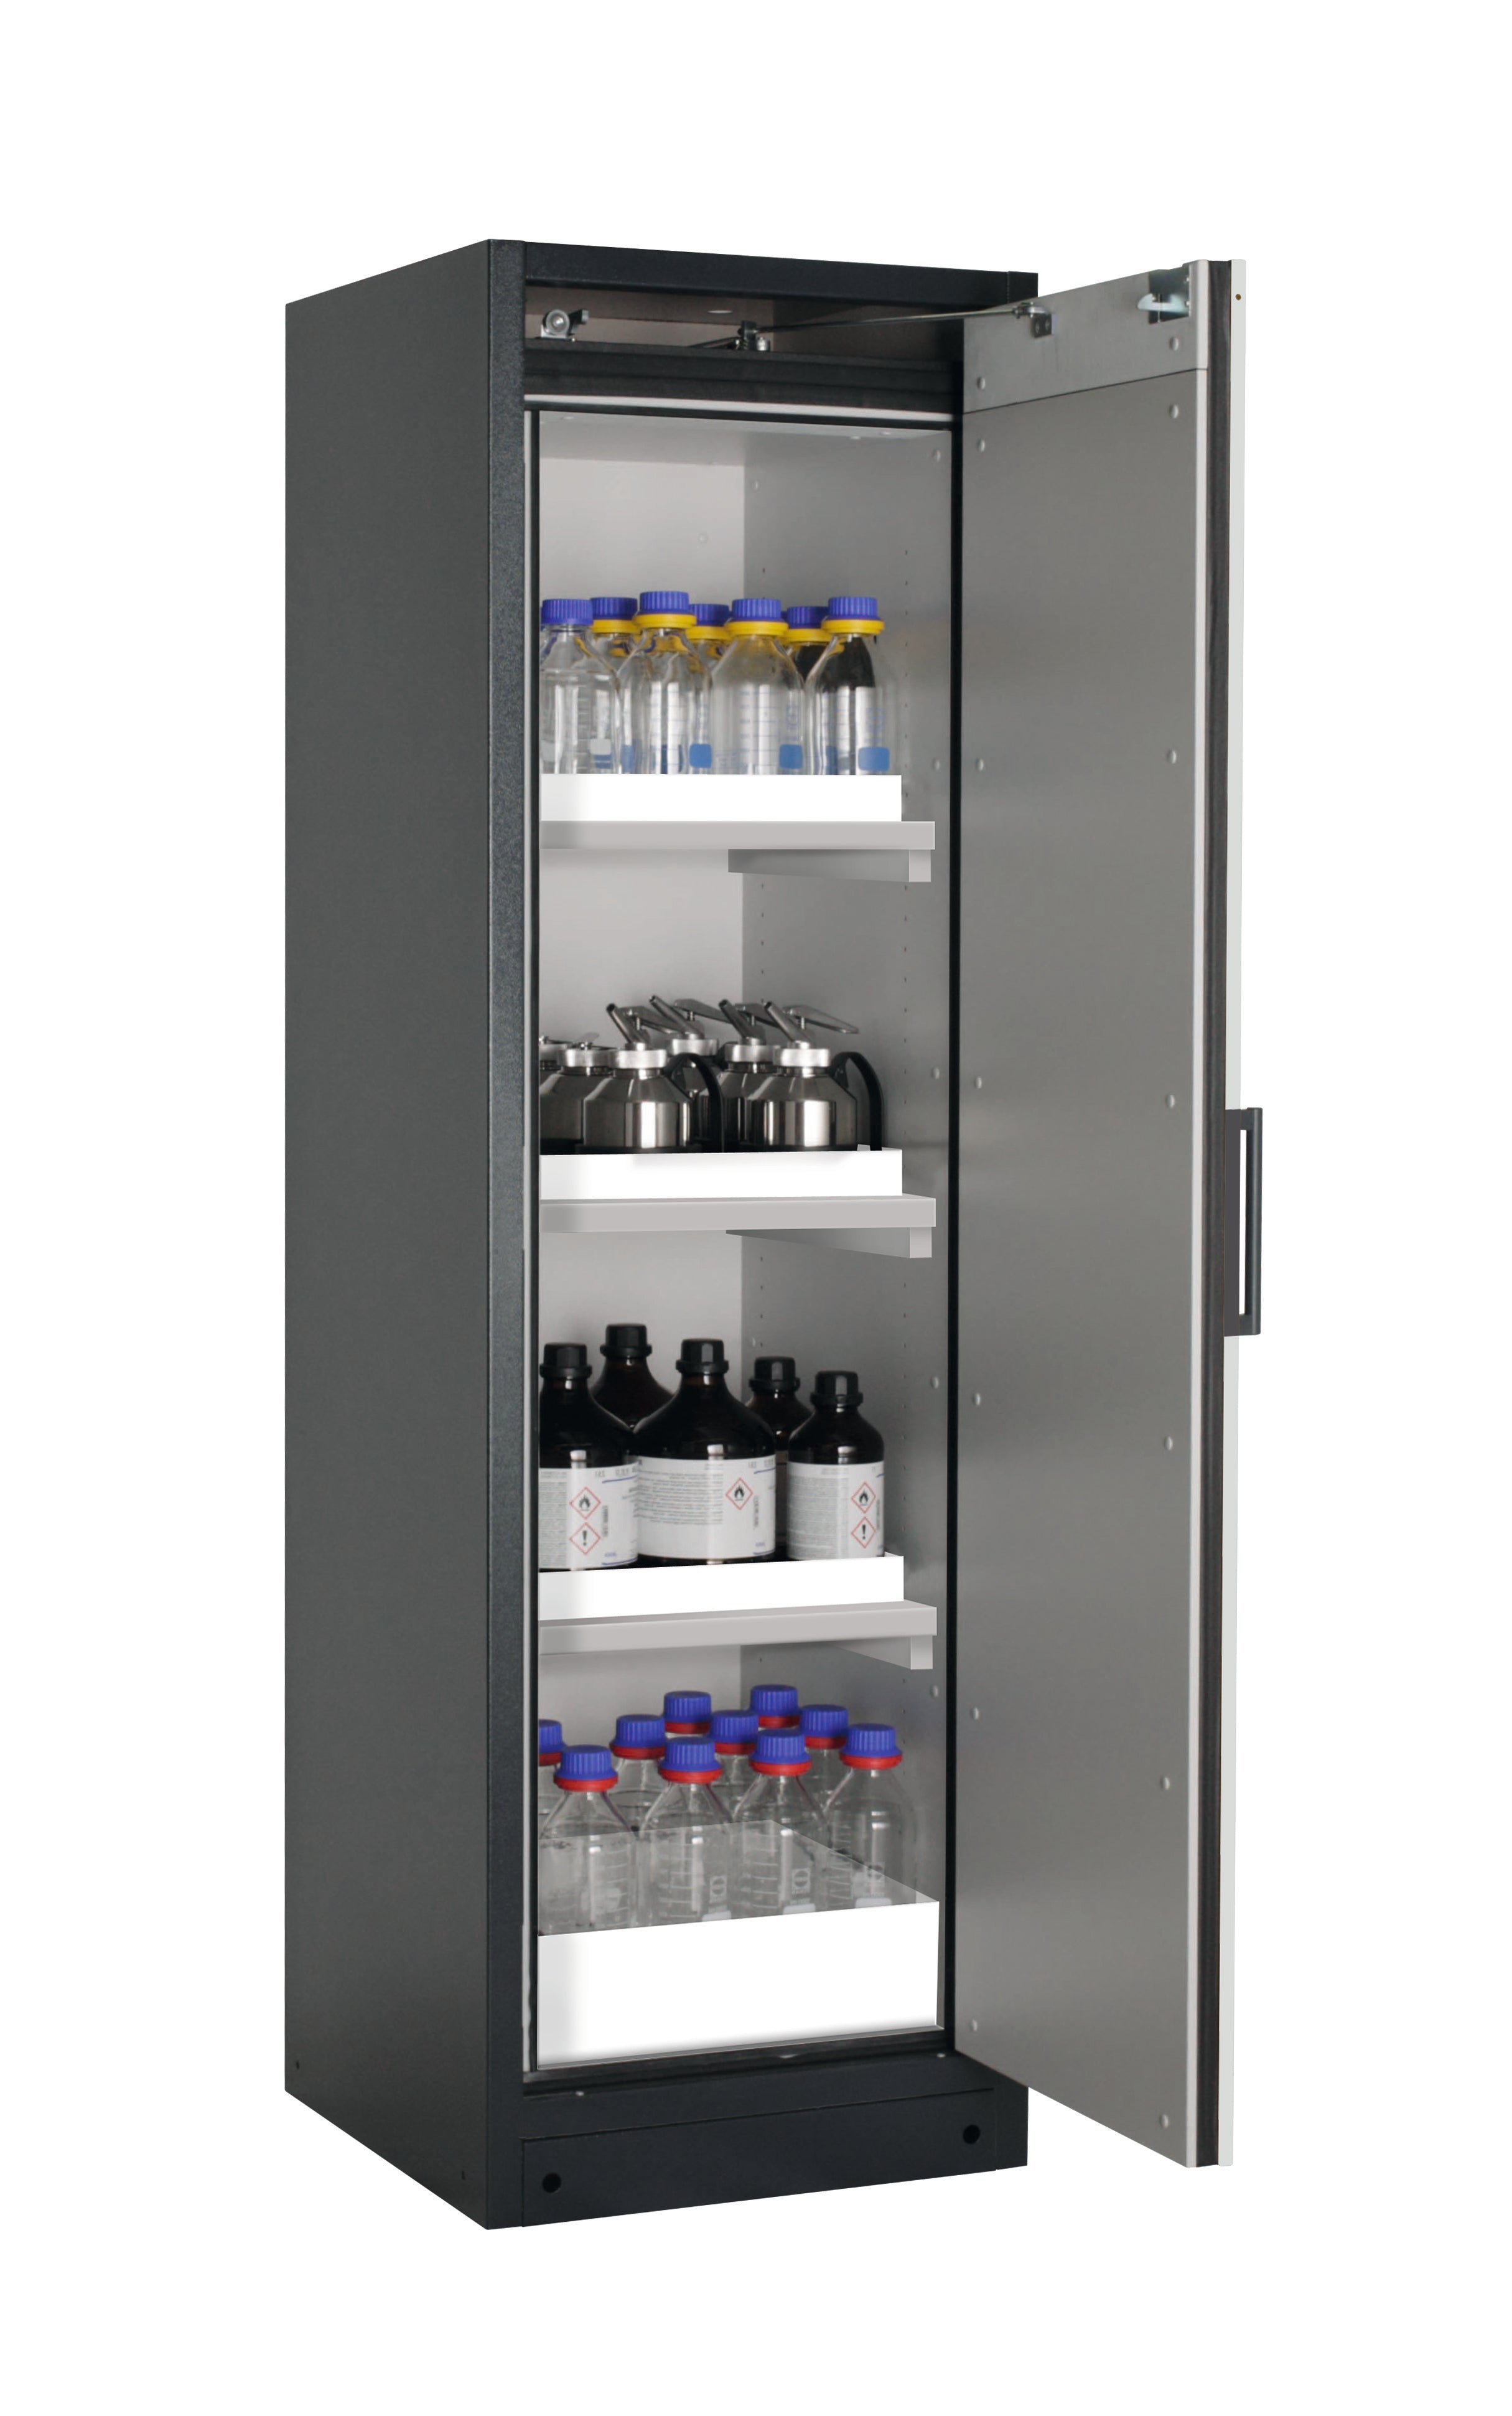 Type 90 safety storage cabinet Q-CLASSIC-90 model Q90.195.060.R in light grey RAL 7035 with 3x tray shelf (standard) (polypropylene),